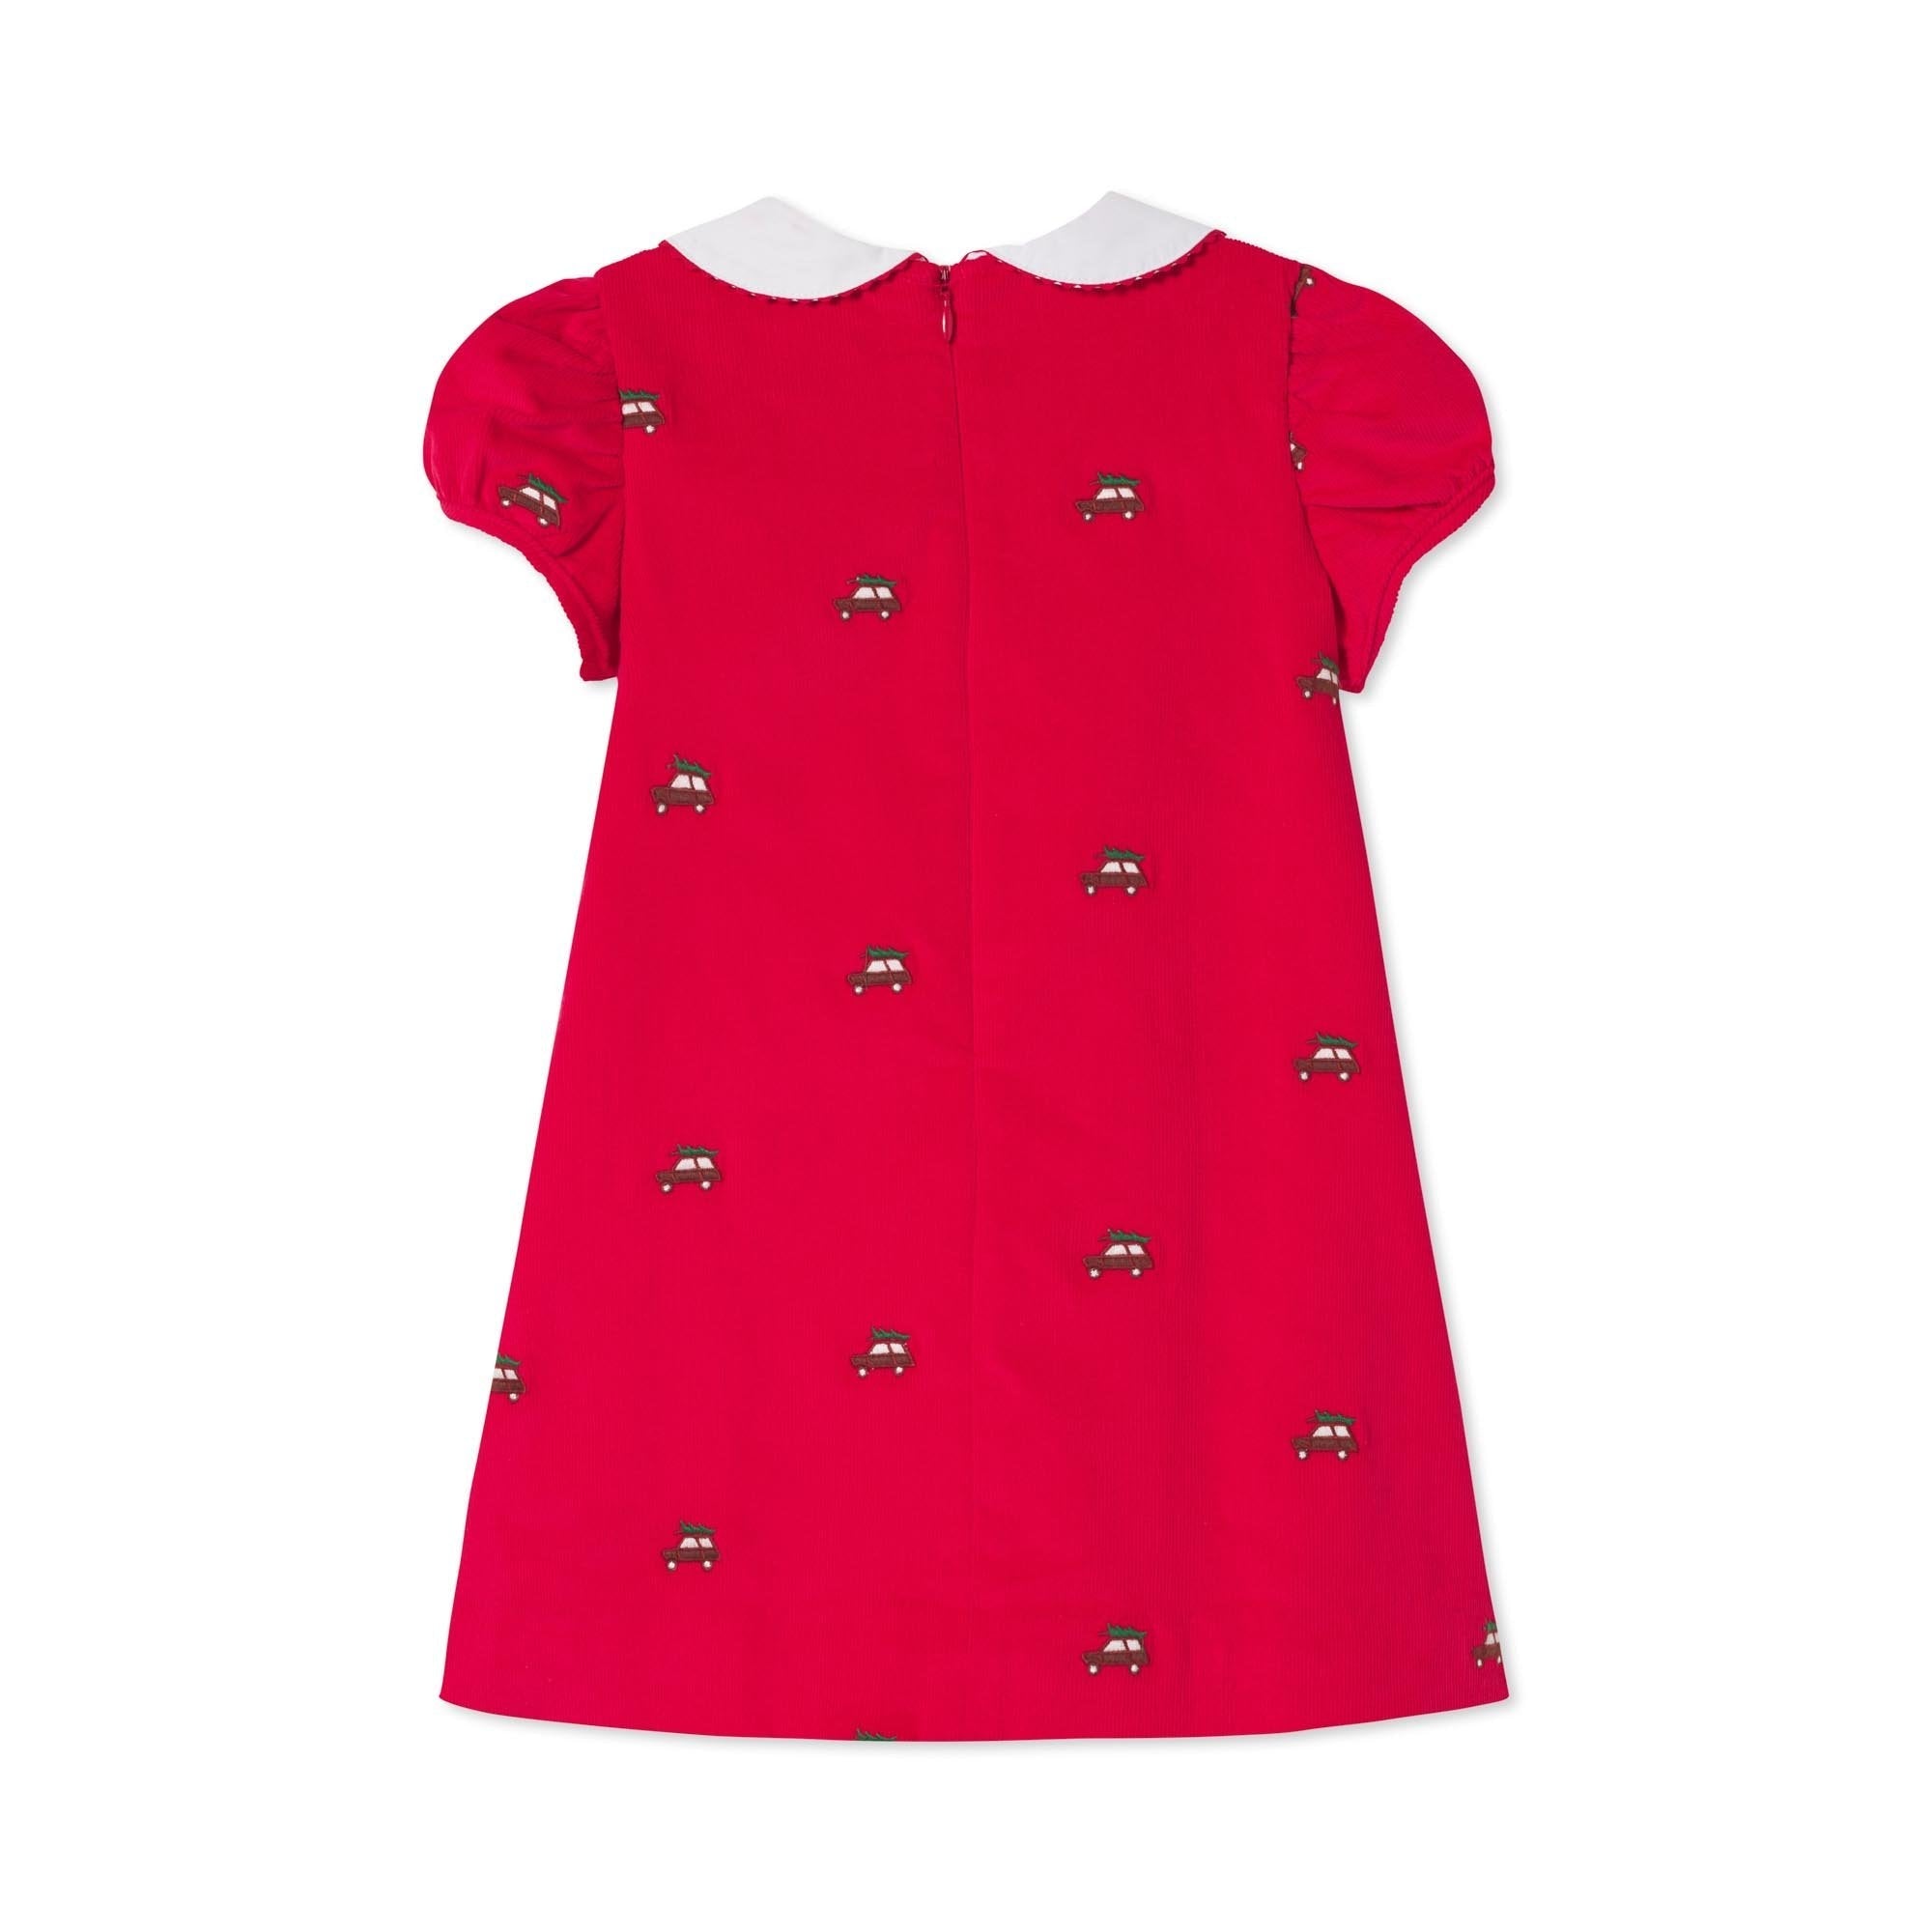 Paige Dress, Crimson with Woody Embroidered